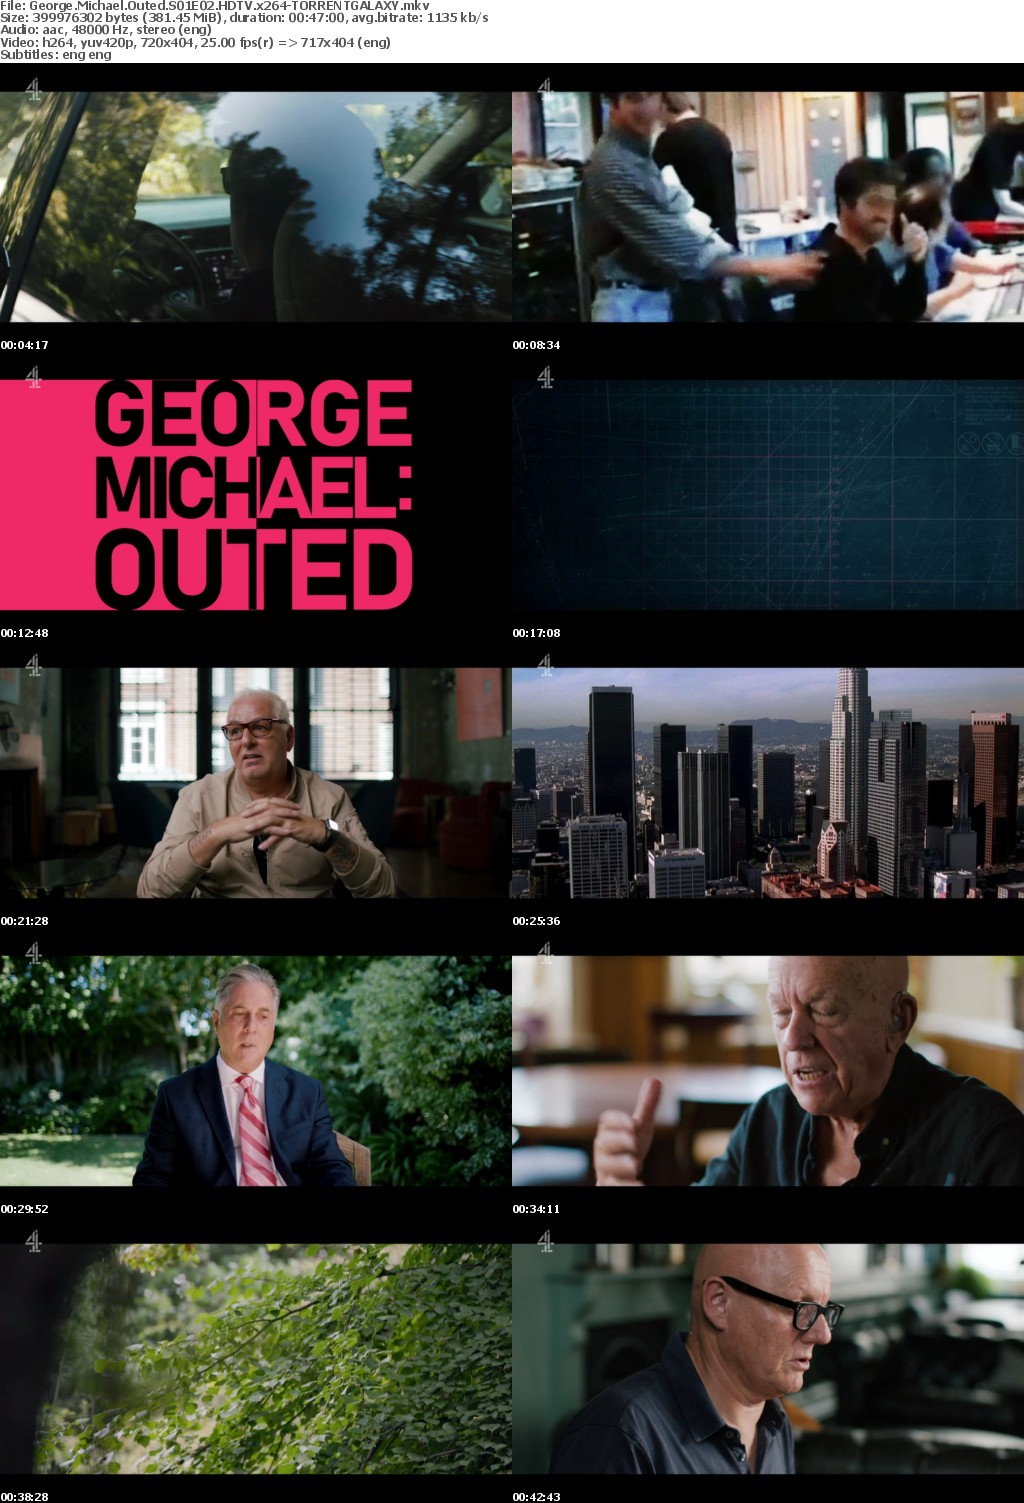 George Michael Outed S01E02 HDTV x264-GALAXY